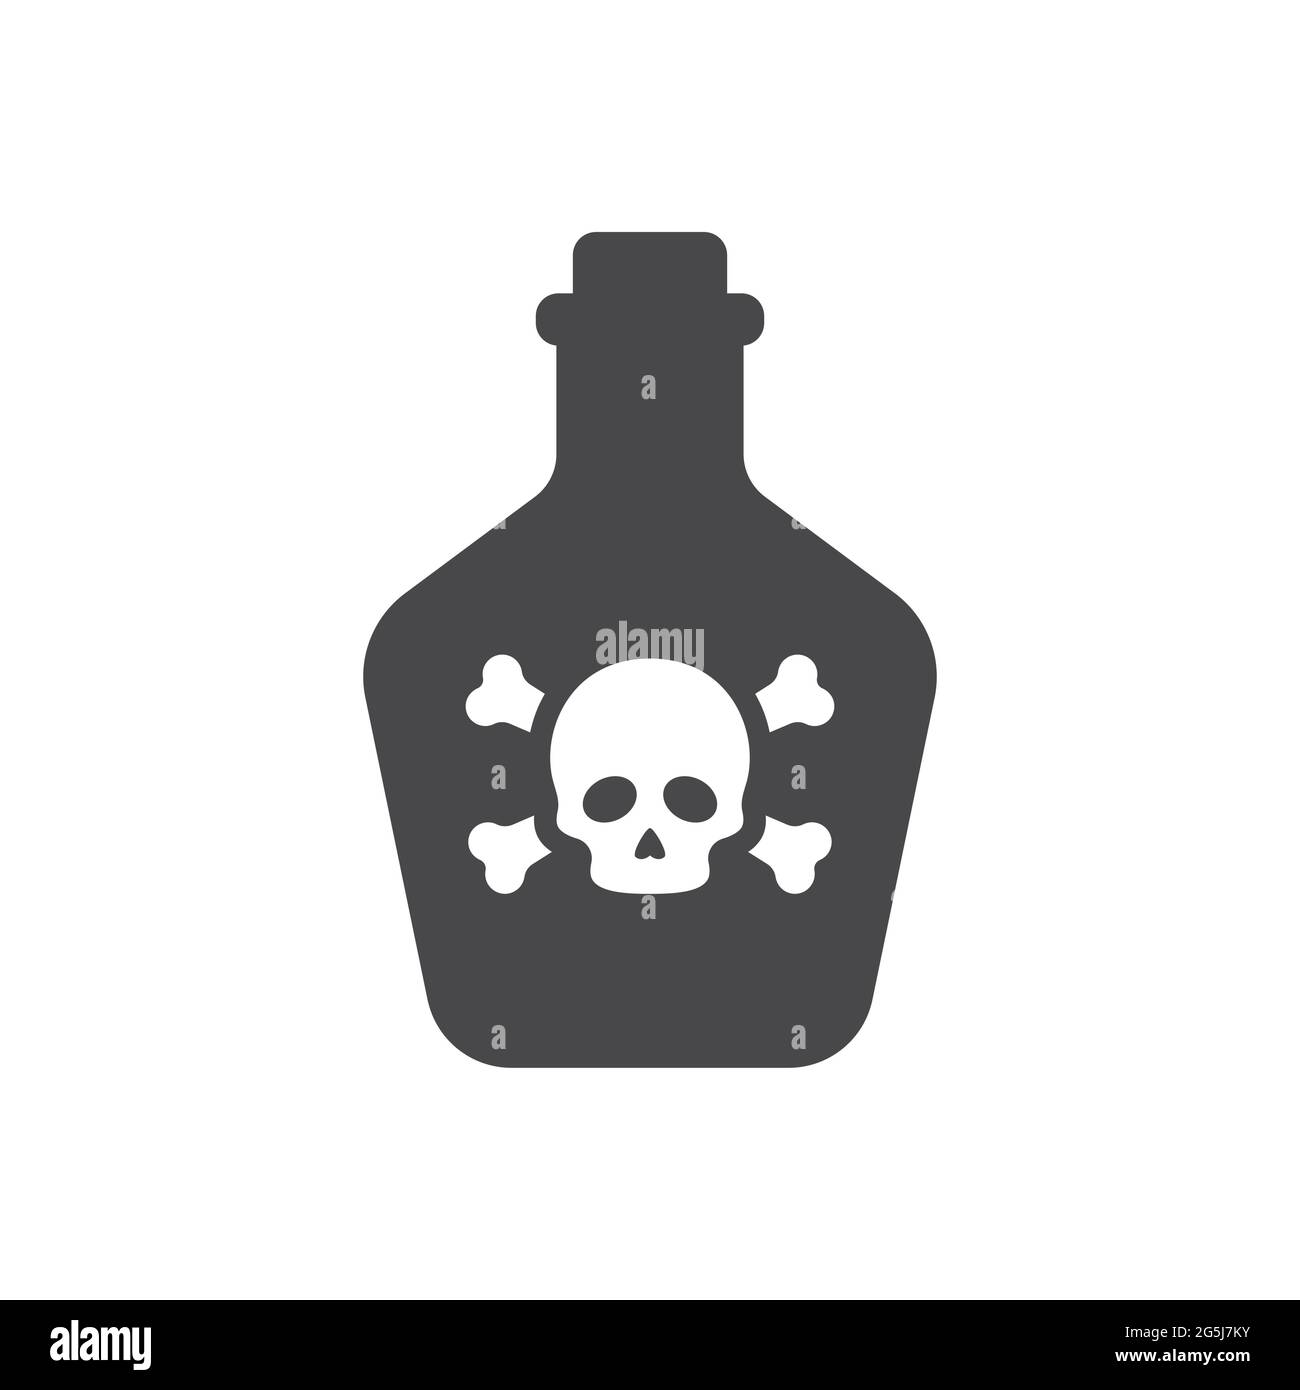 Bottle of poison with skull and bones icon. Poisonous sign with crossbones symbol. Stock Vector